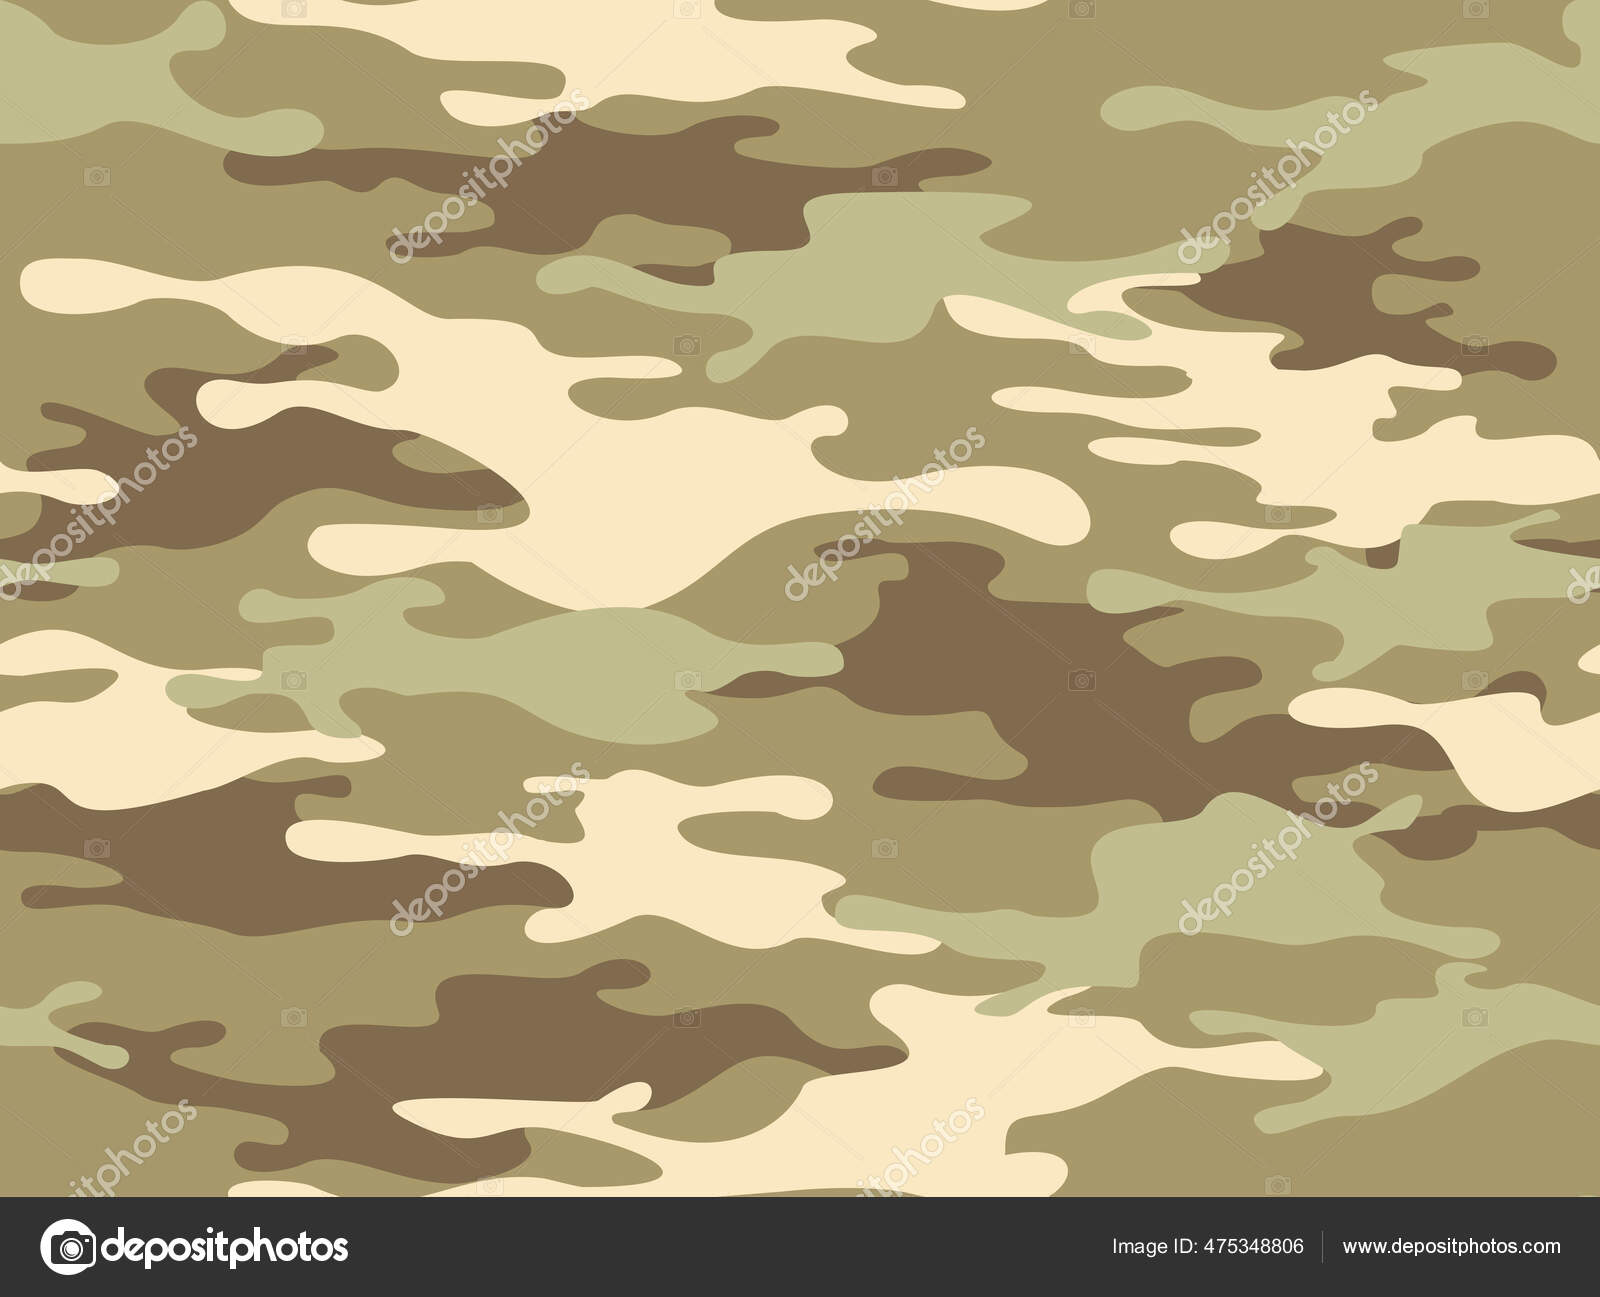 Texture military camouflage seamless pattern Vector Image